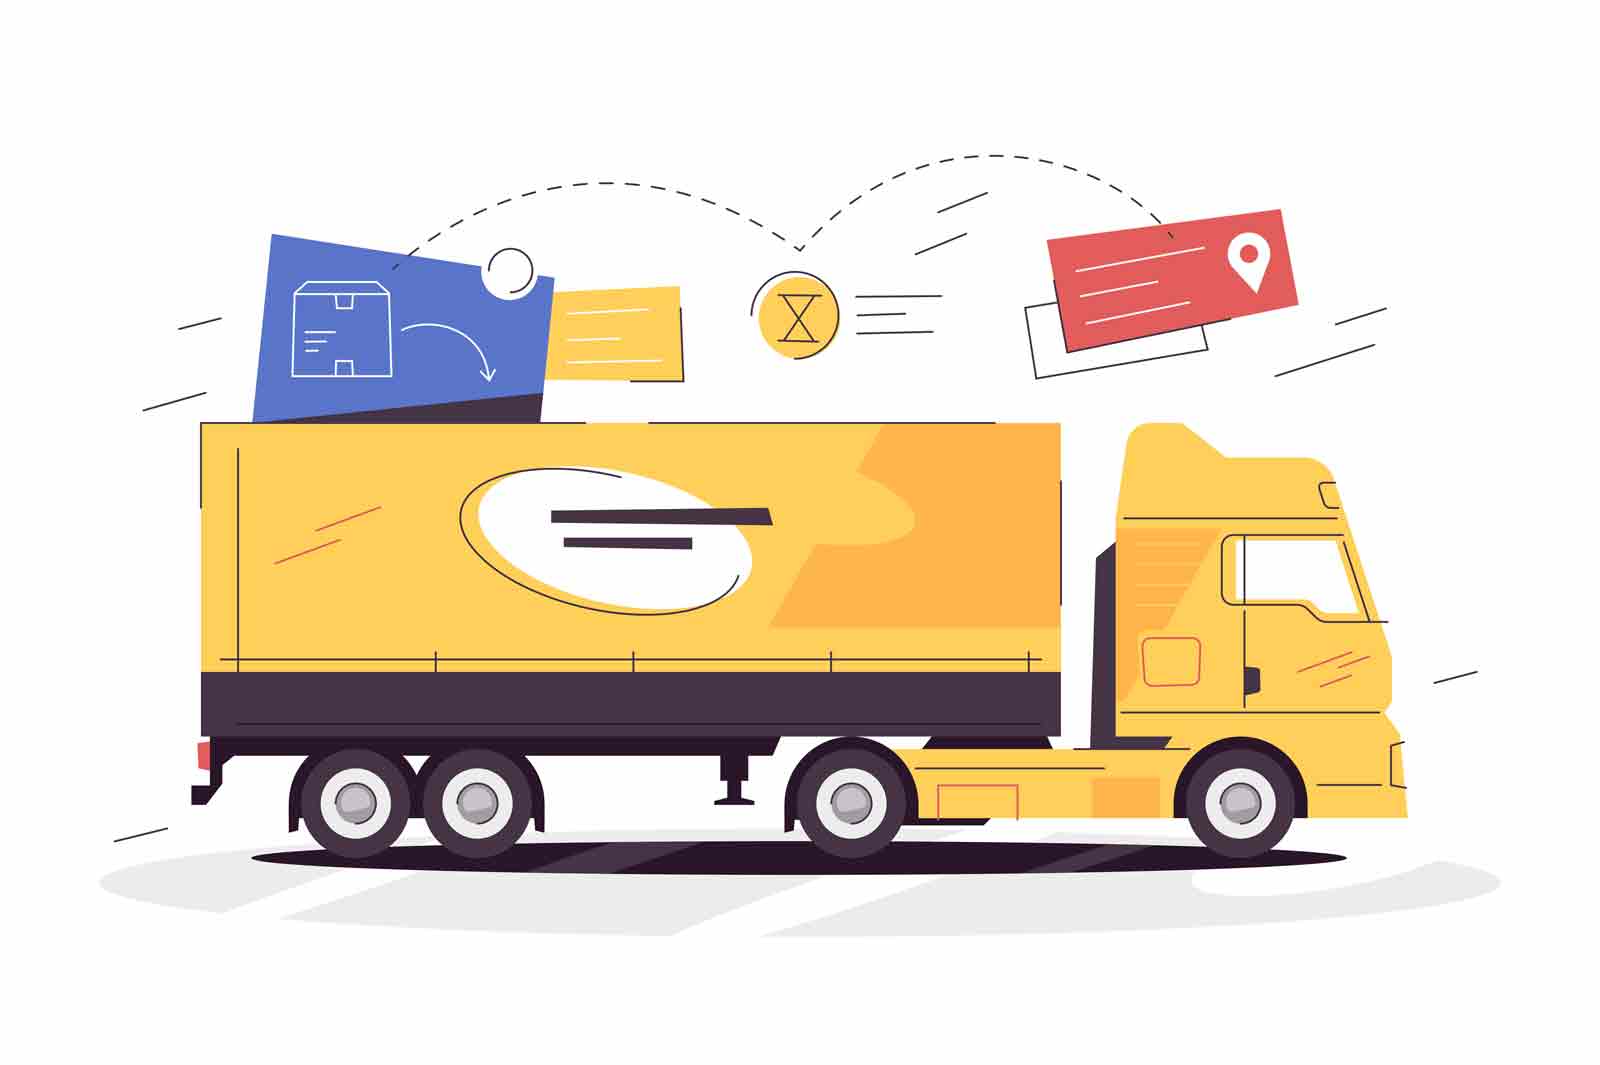 Cargo truck deliver cargo order to destination vector illustration. Yellow truck loaded with boxes flat style. Delivery service concept